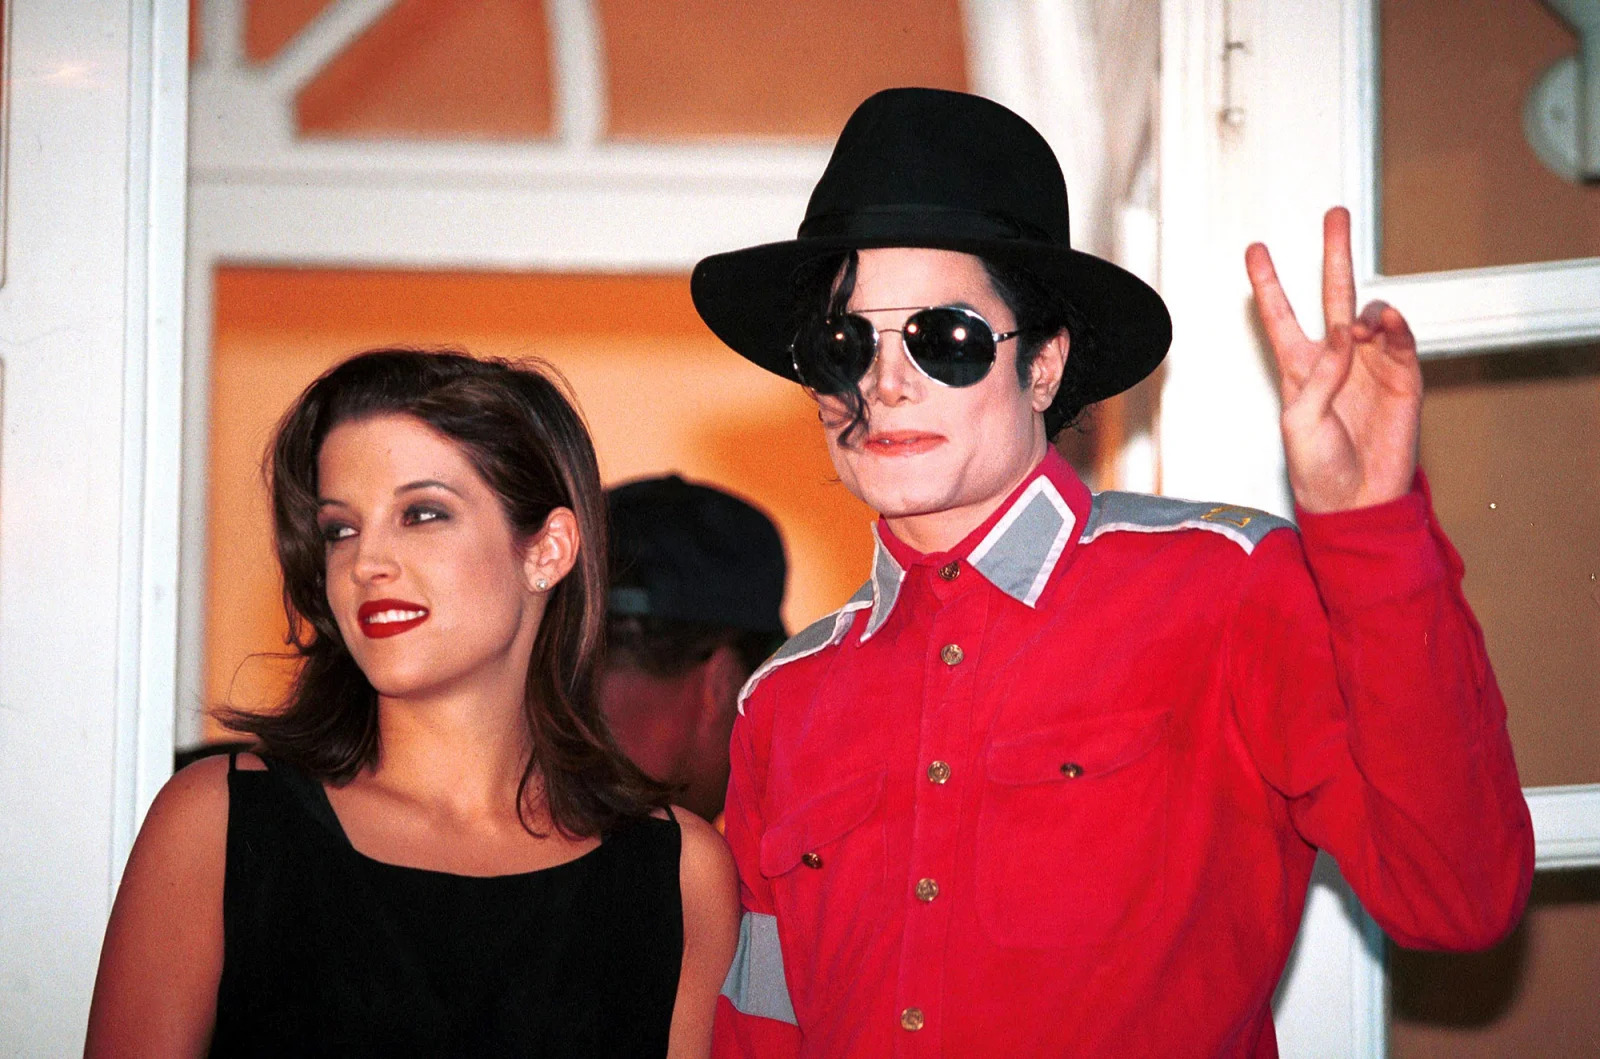 January-1996-Divorce-Michael-Jackson-and-Lisa-Marie-Presley-A-Timeline-of-Their-Brief-Marriage.jpg